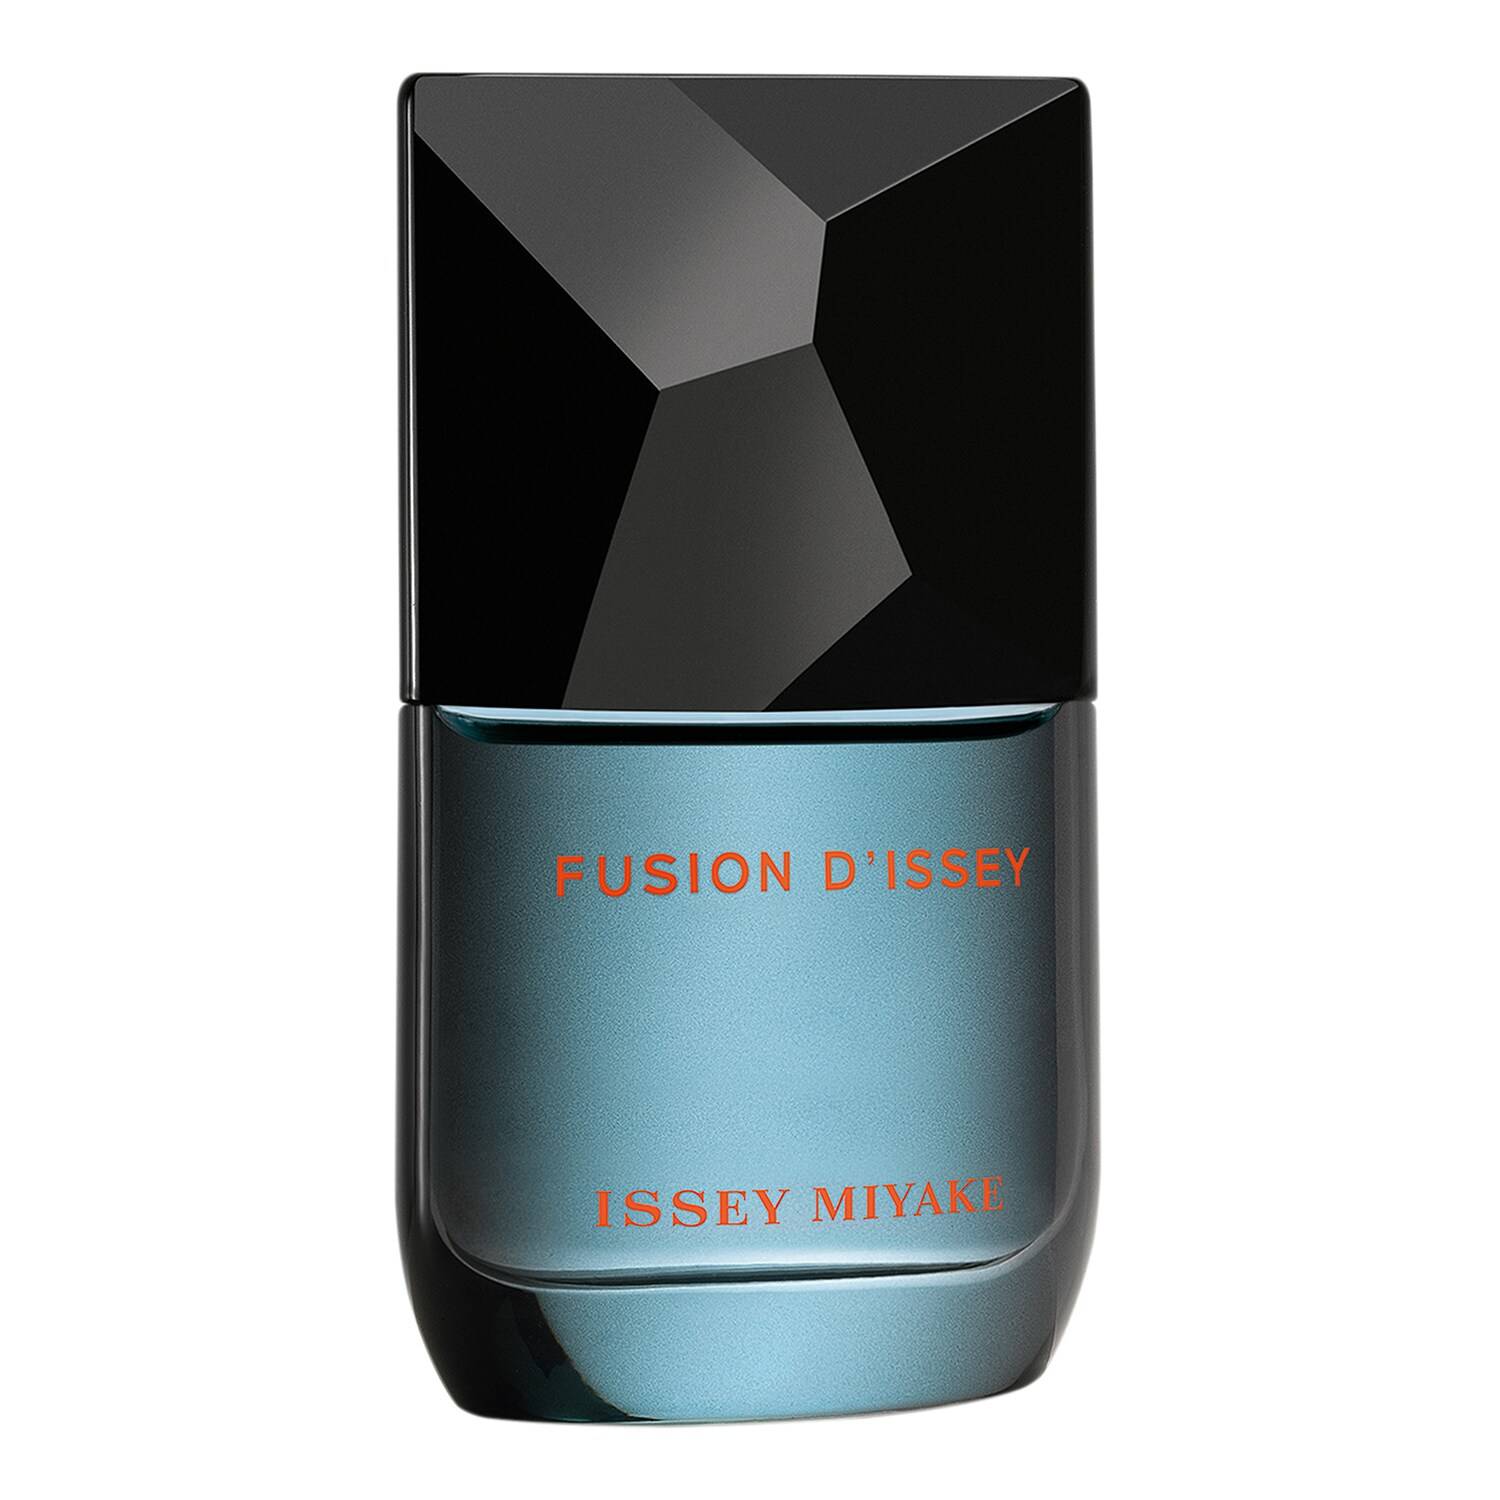 Issey Miyake Fusion D'Issey - Eau De Toilette Fusion D'Issey Edt 50Ml